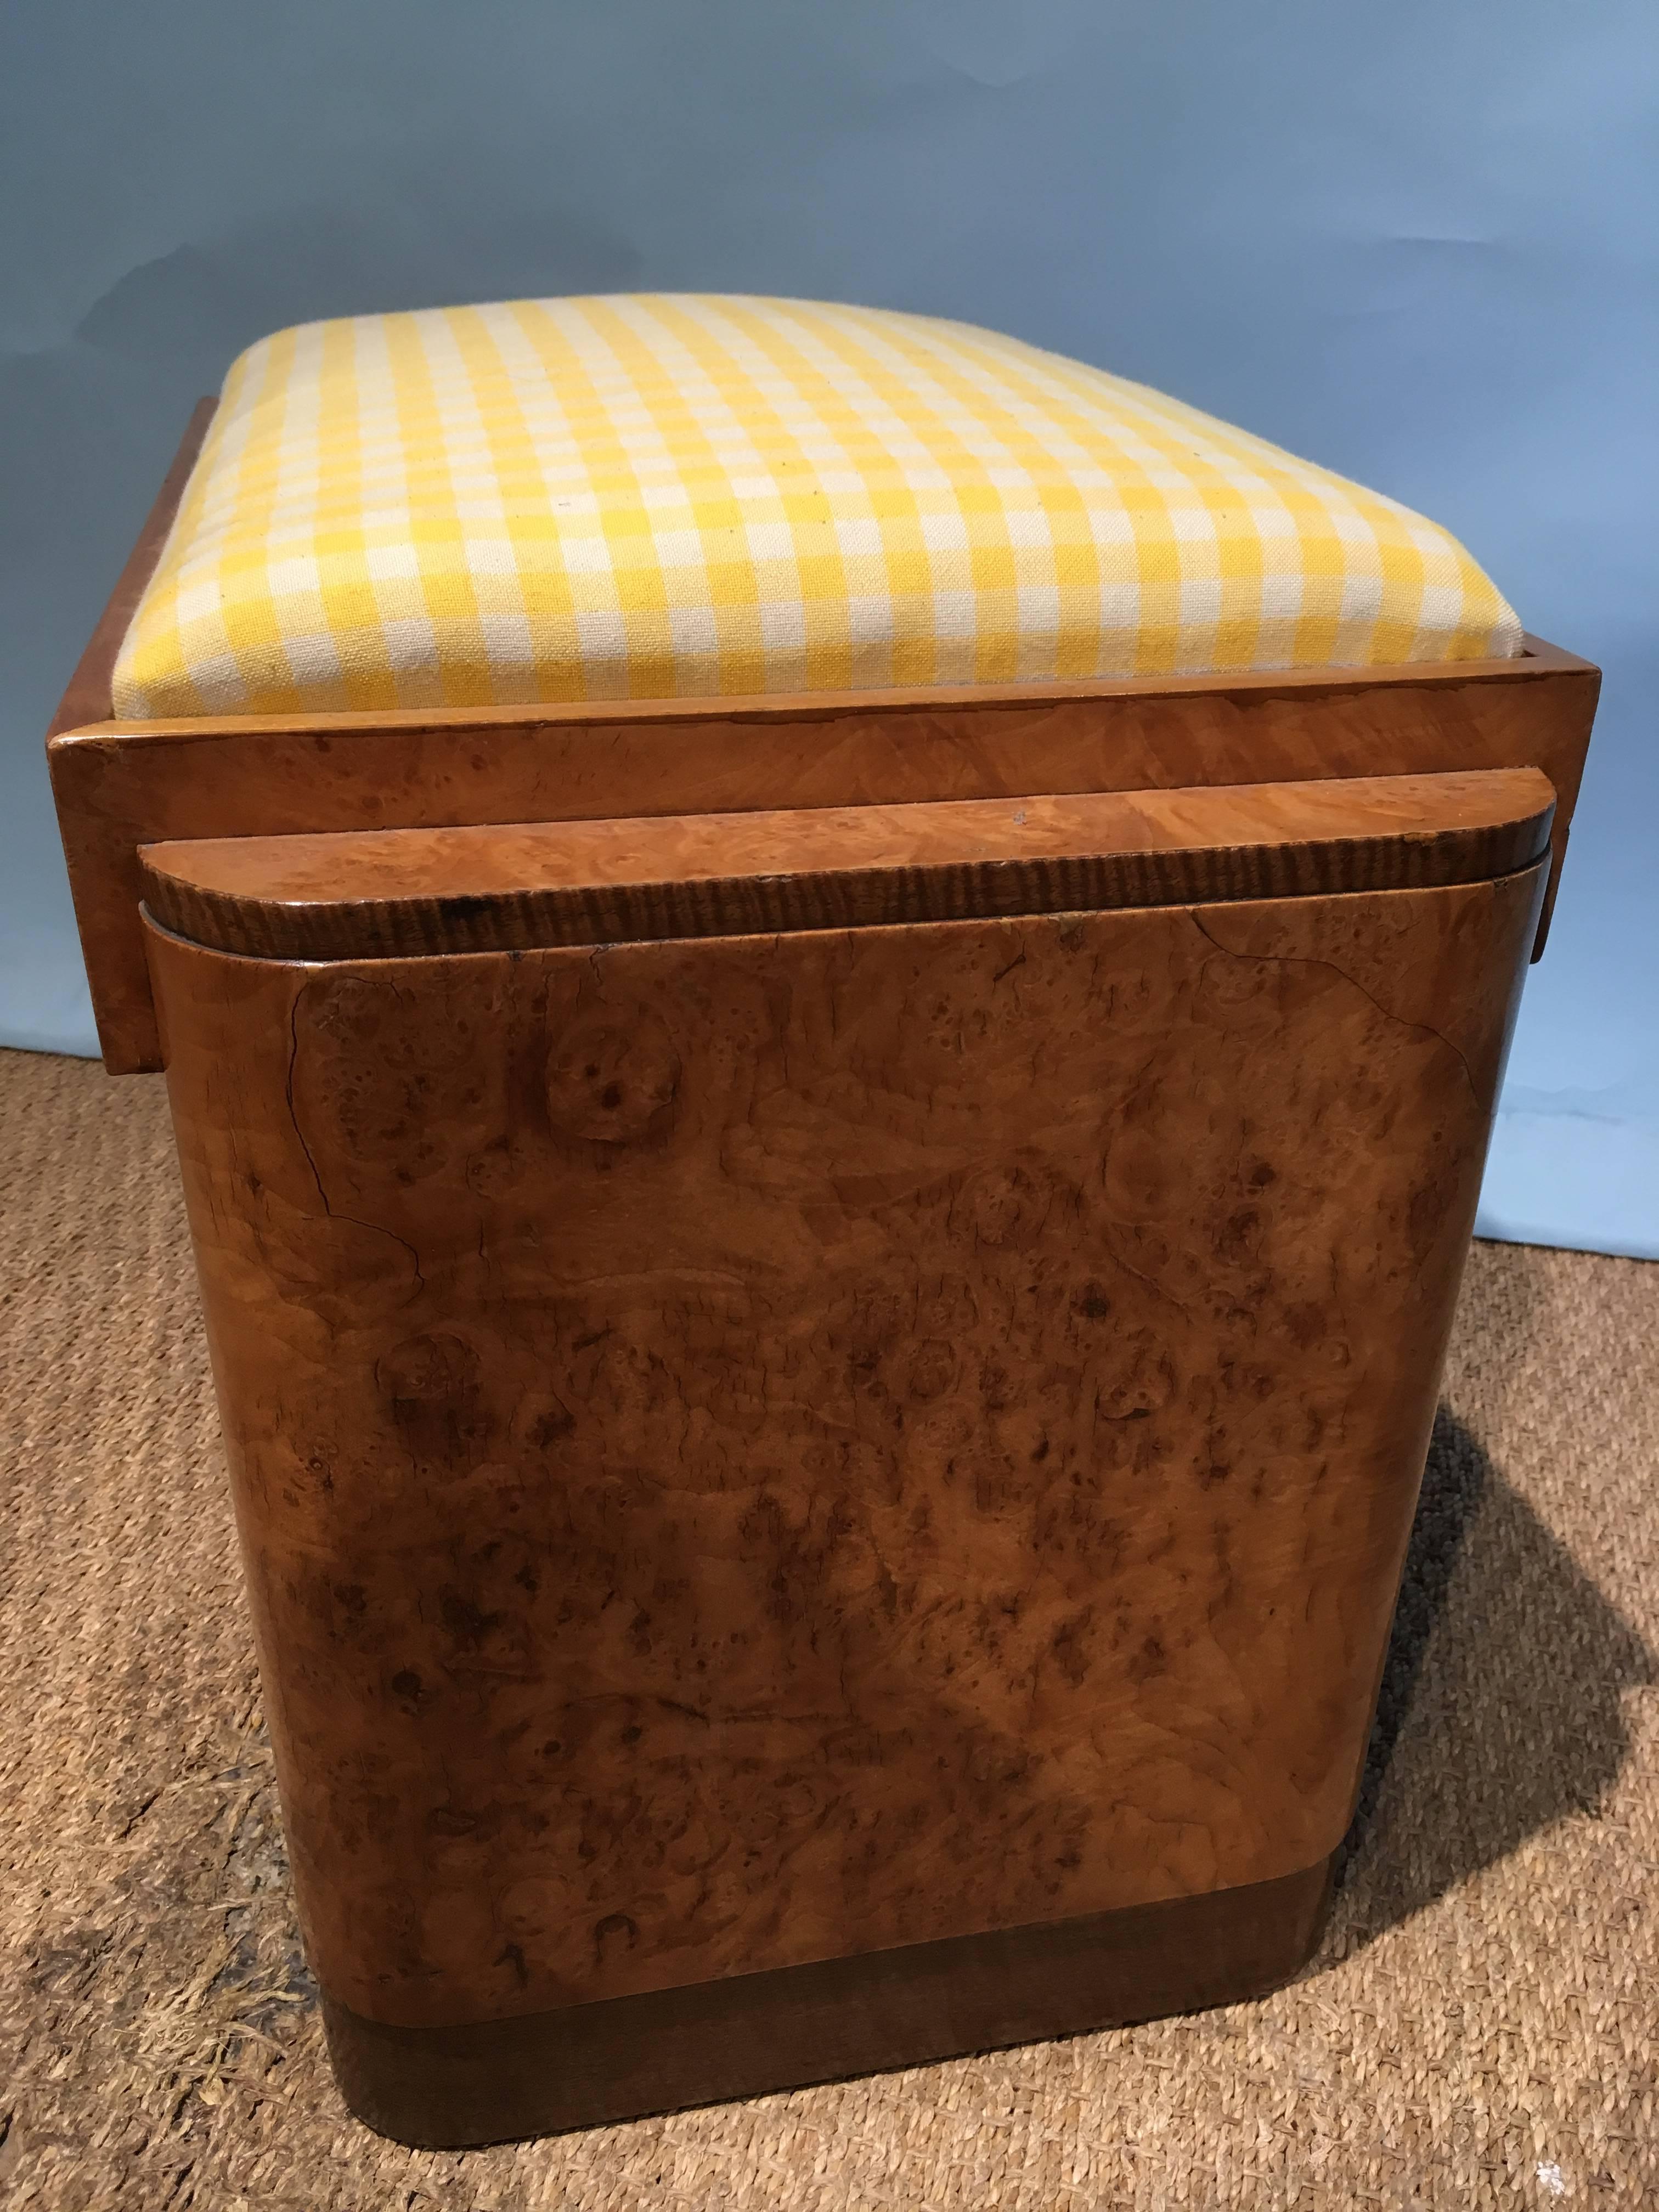 Very good quality Art Deco burr walnut stool, English, circa 1930s

Presented in top showroom condition having been through our workshops and been cleaned and polished , the top has been re-upholstered 

Measures: H 18 inches 
W 22 inches 
D